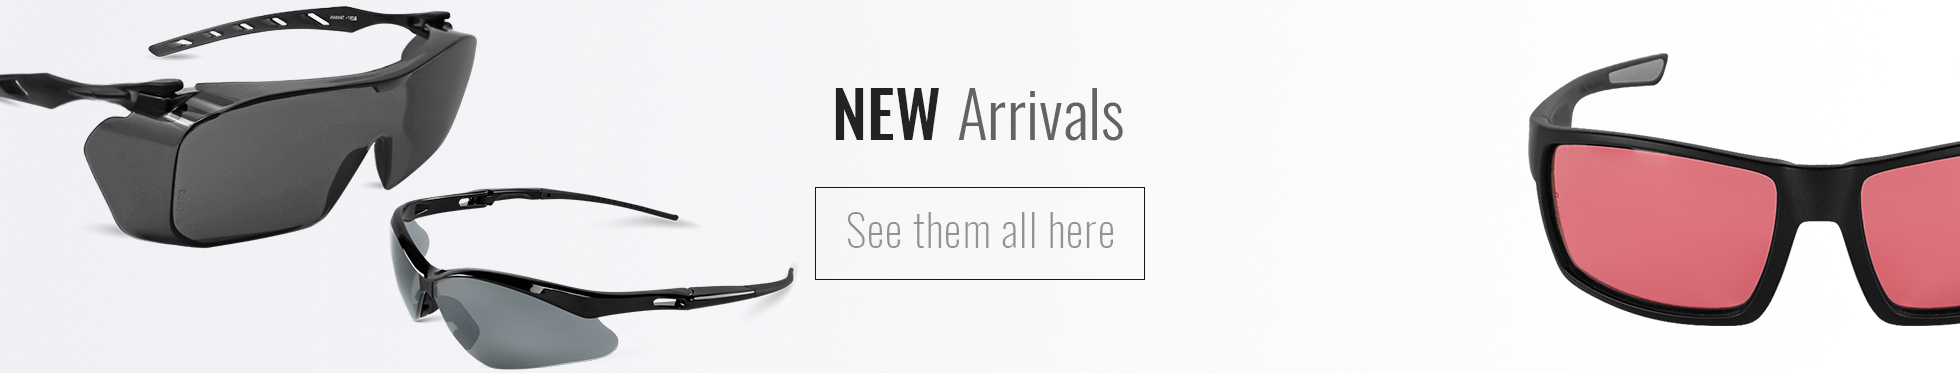 New Product Arrivals